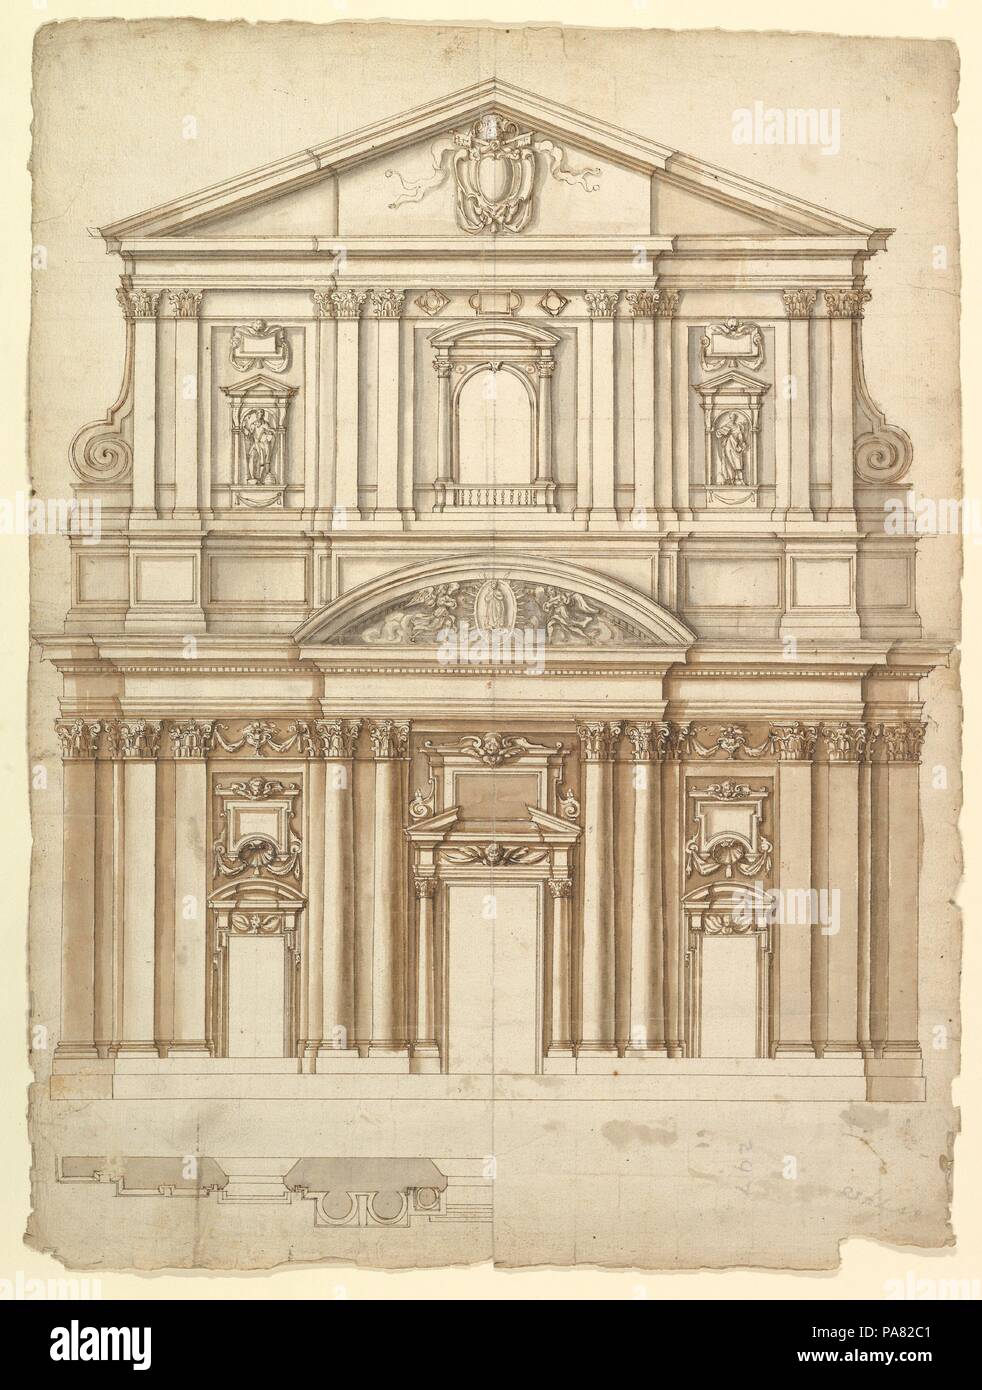 Santa Maria in Vallicella, elevation; plan (recto) blank (verso). Dimensions: sheet: 23 1/8 x 17 1/8 in. (58.7 x 43.5 cm). Draftsman: Drawn by Anonymous, French, 16th century. Date: late 16th century. Museum: Metropolitan Museum of Art, New York, USA. Stock Photo